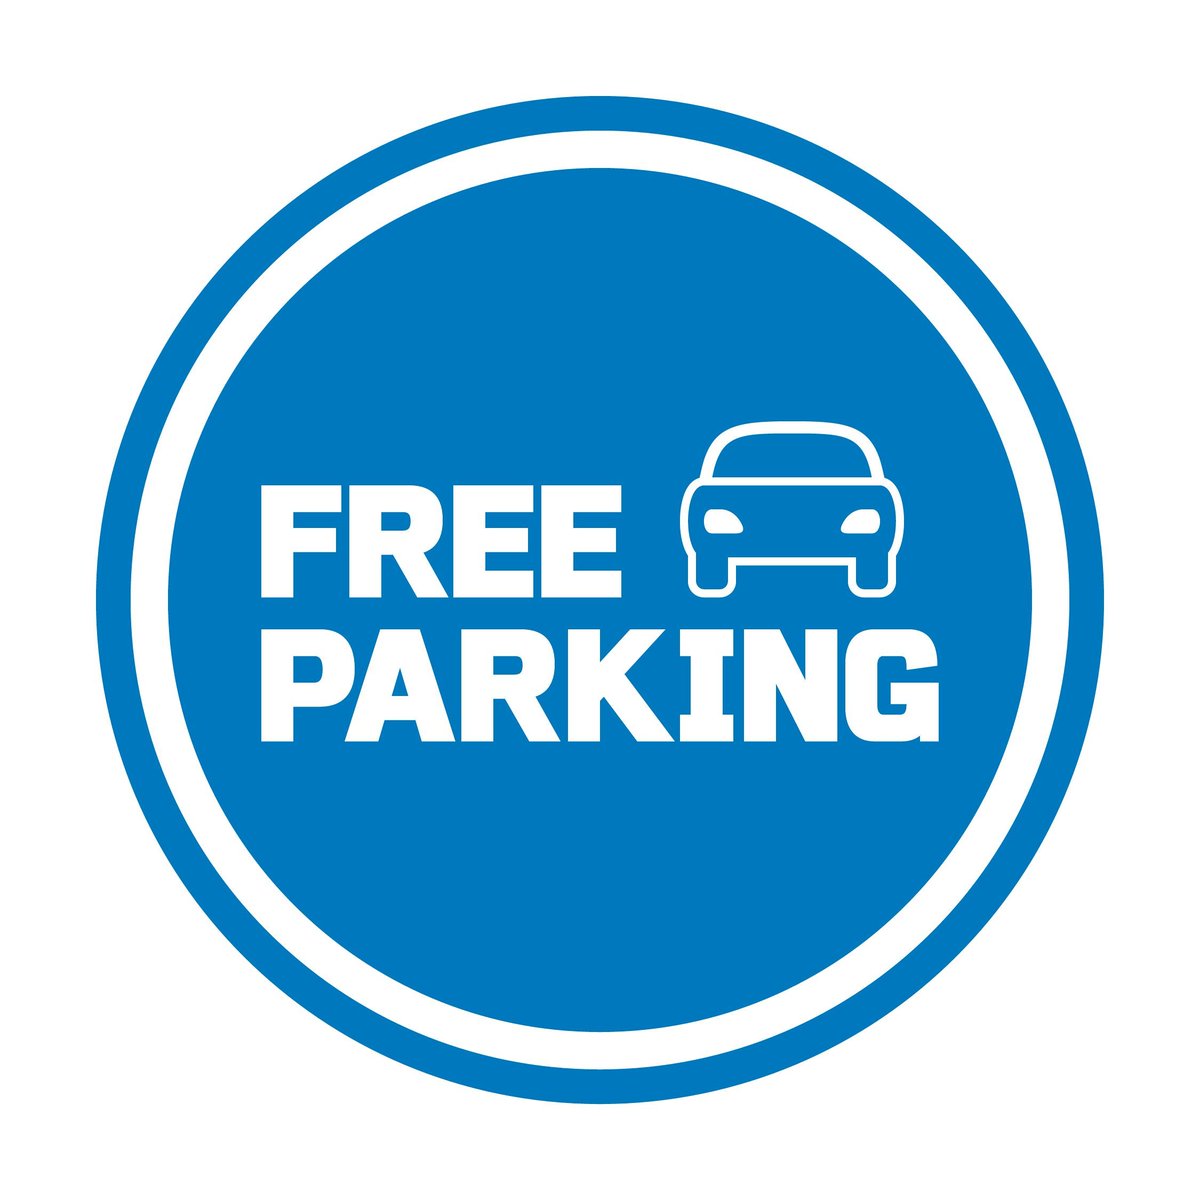 Free festive parking to support local businesses – all council off-street pay and display parking will be free across Argyll and Bute, in the run up to Christmas from 9-24 December. Read more argyll-bute.gov.uk/news/2022/dec/…